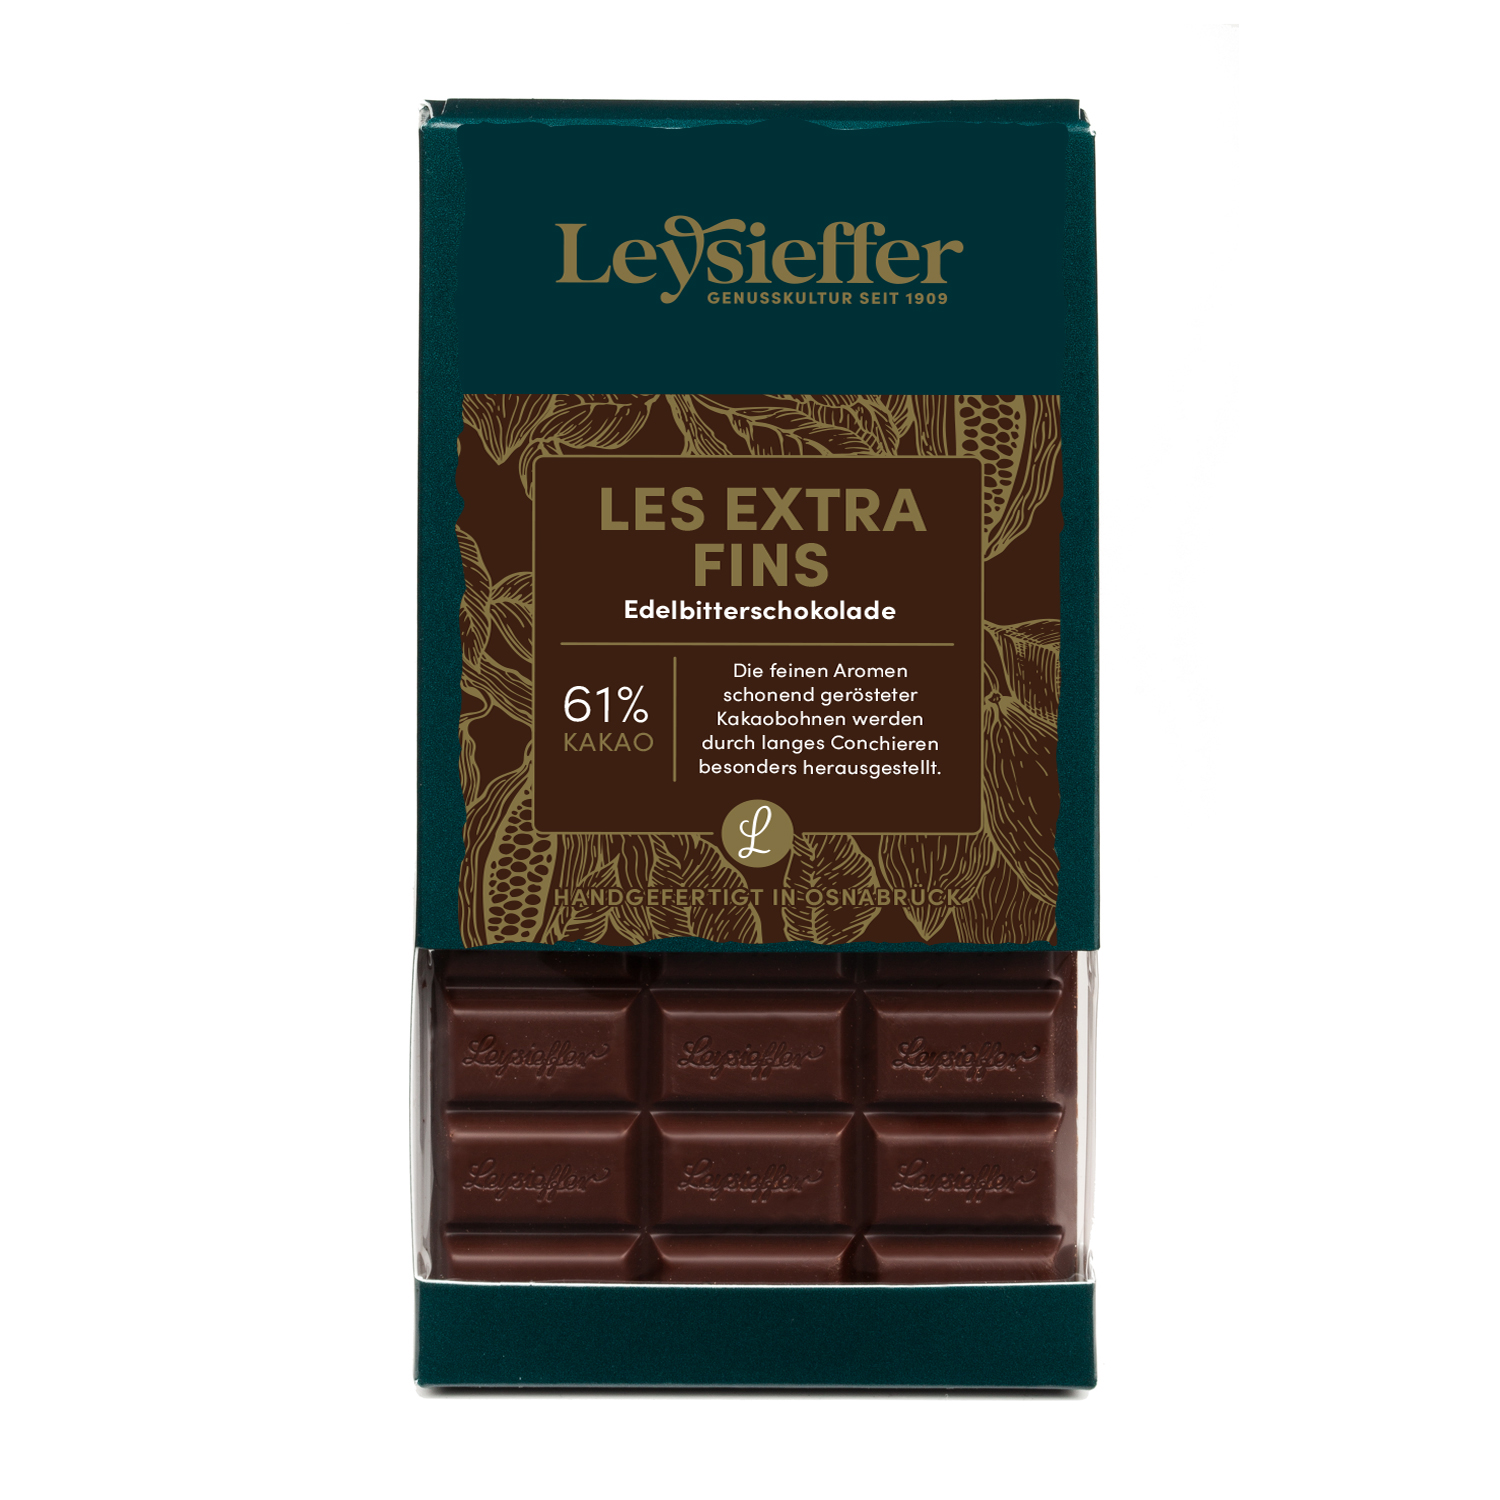 Bitter-Sweet Chocolate "Les Extra fins"